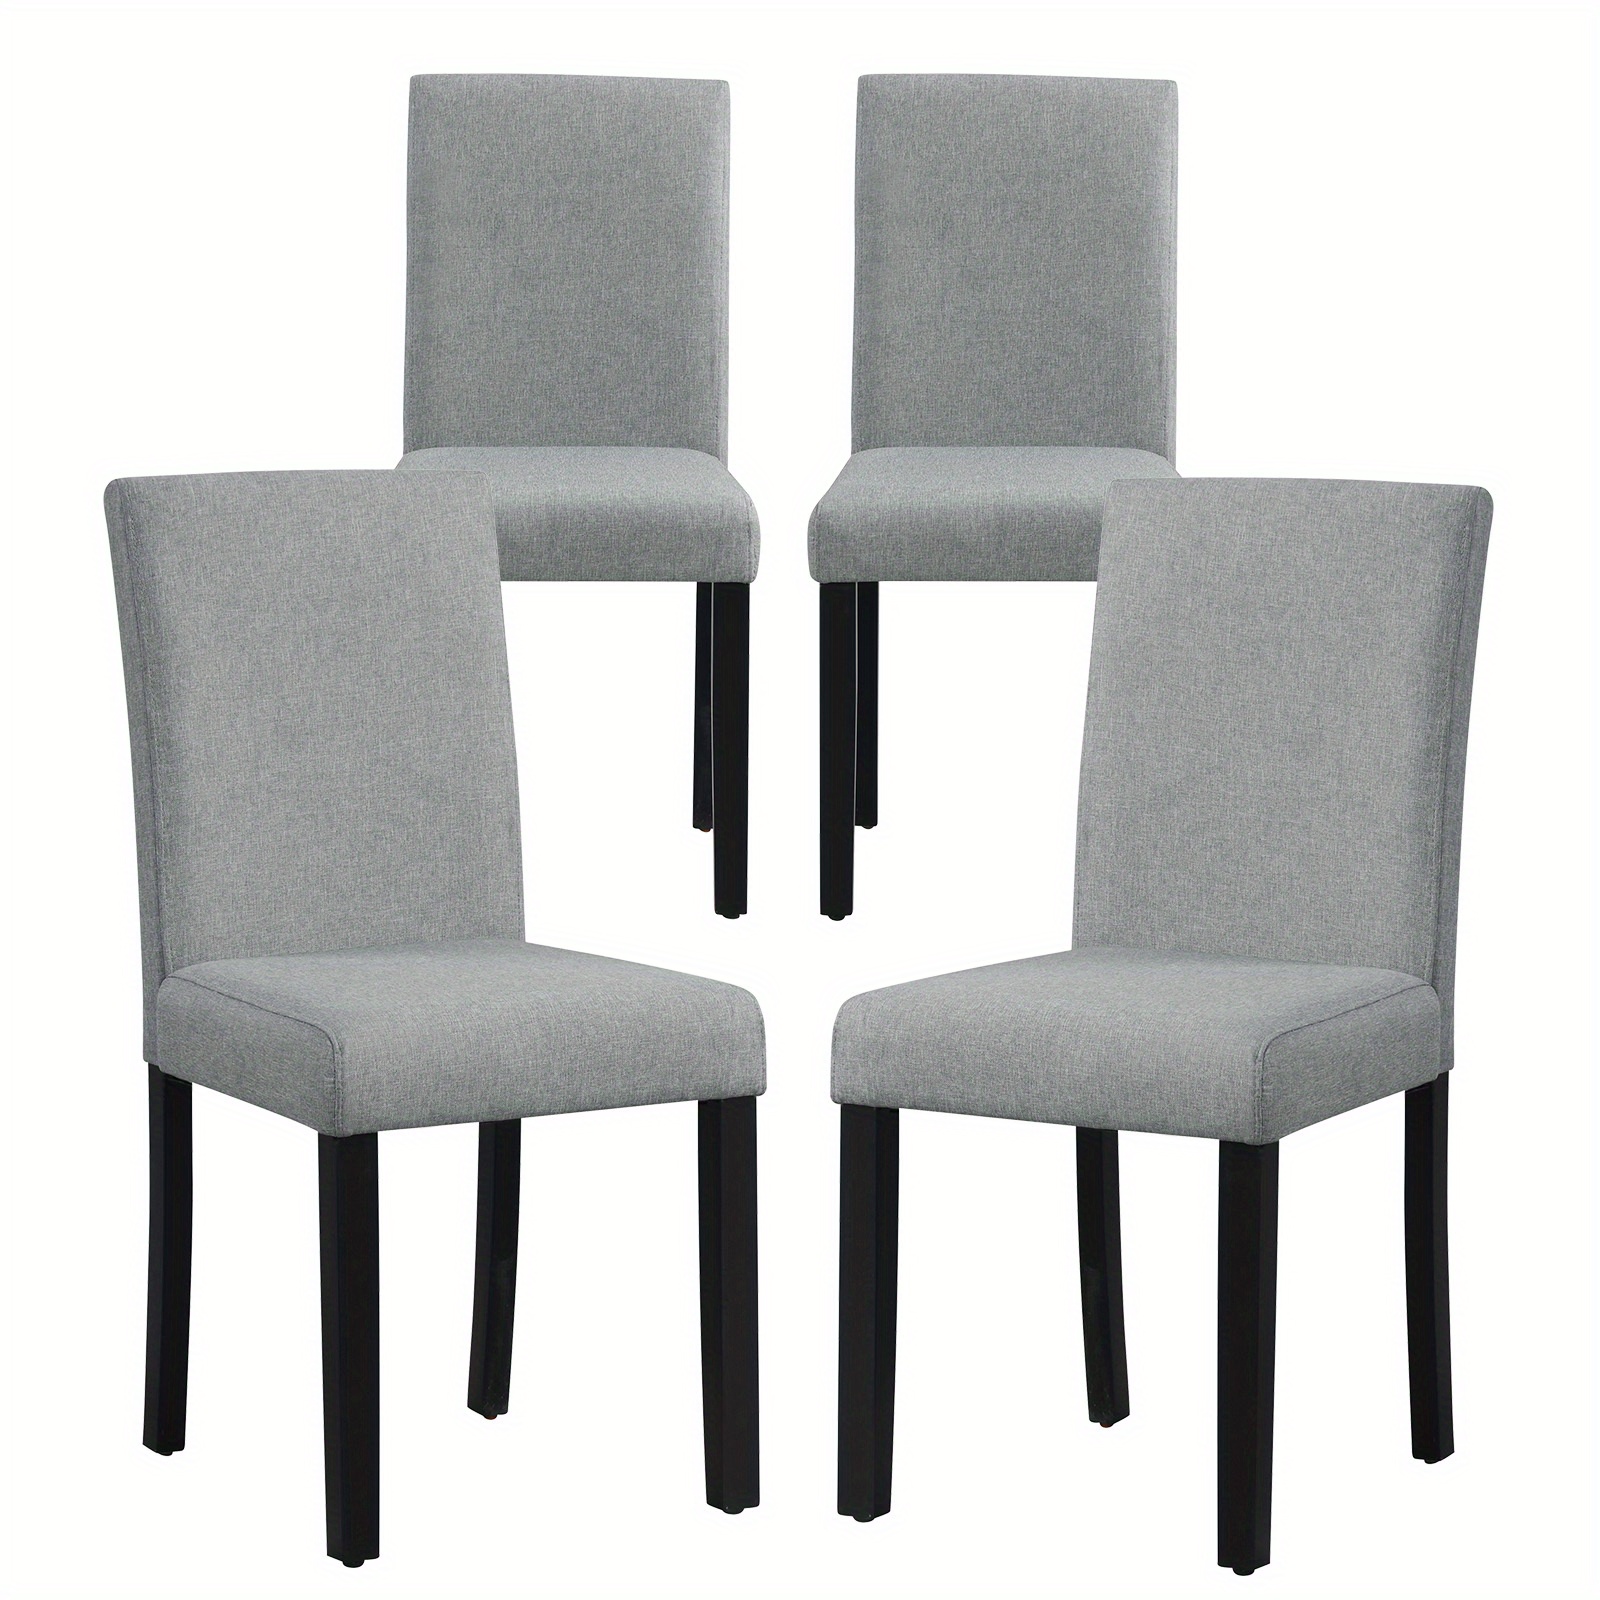 

Lifezeal Dining Chair Set Of 4 W/ Acacia Wood Frame & Rubber Wood Legs Padded Backrest